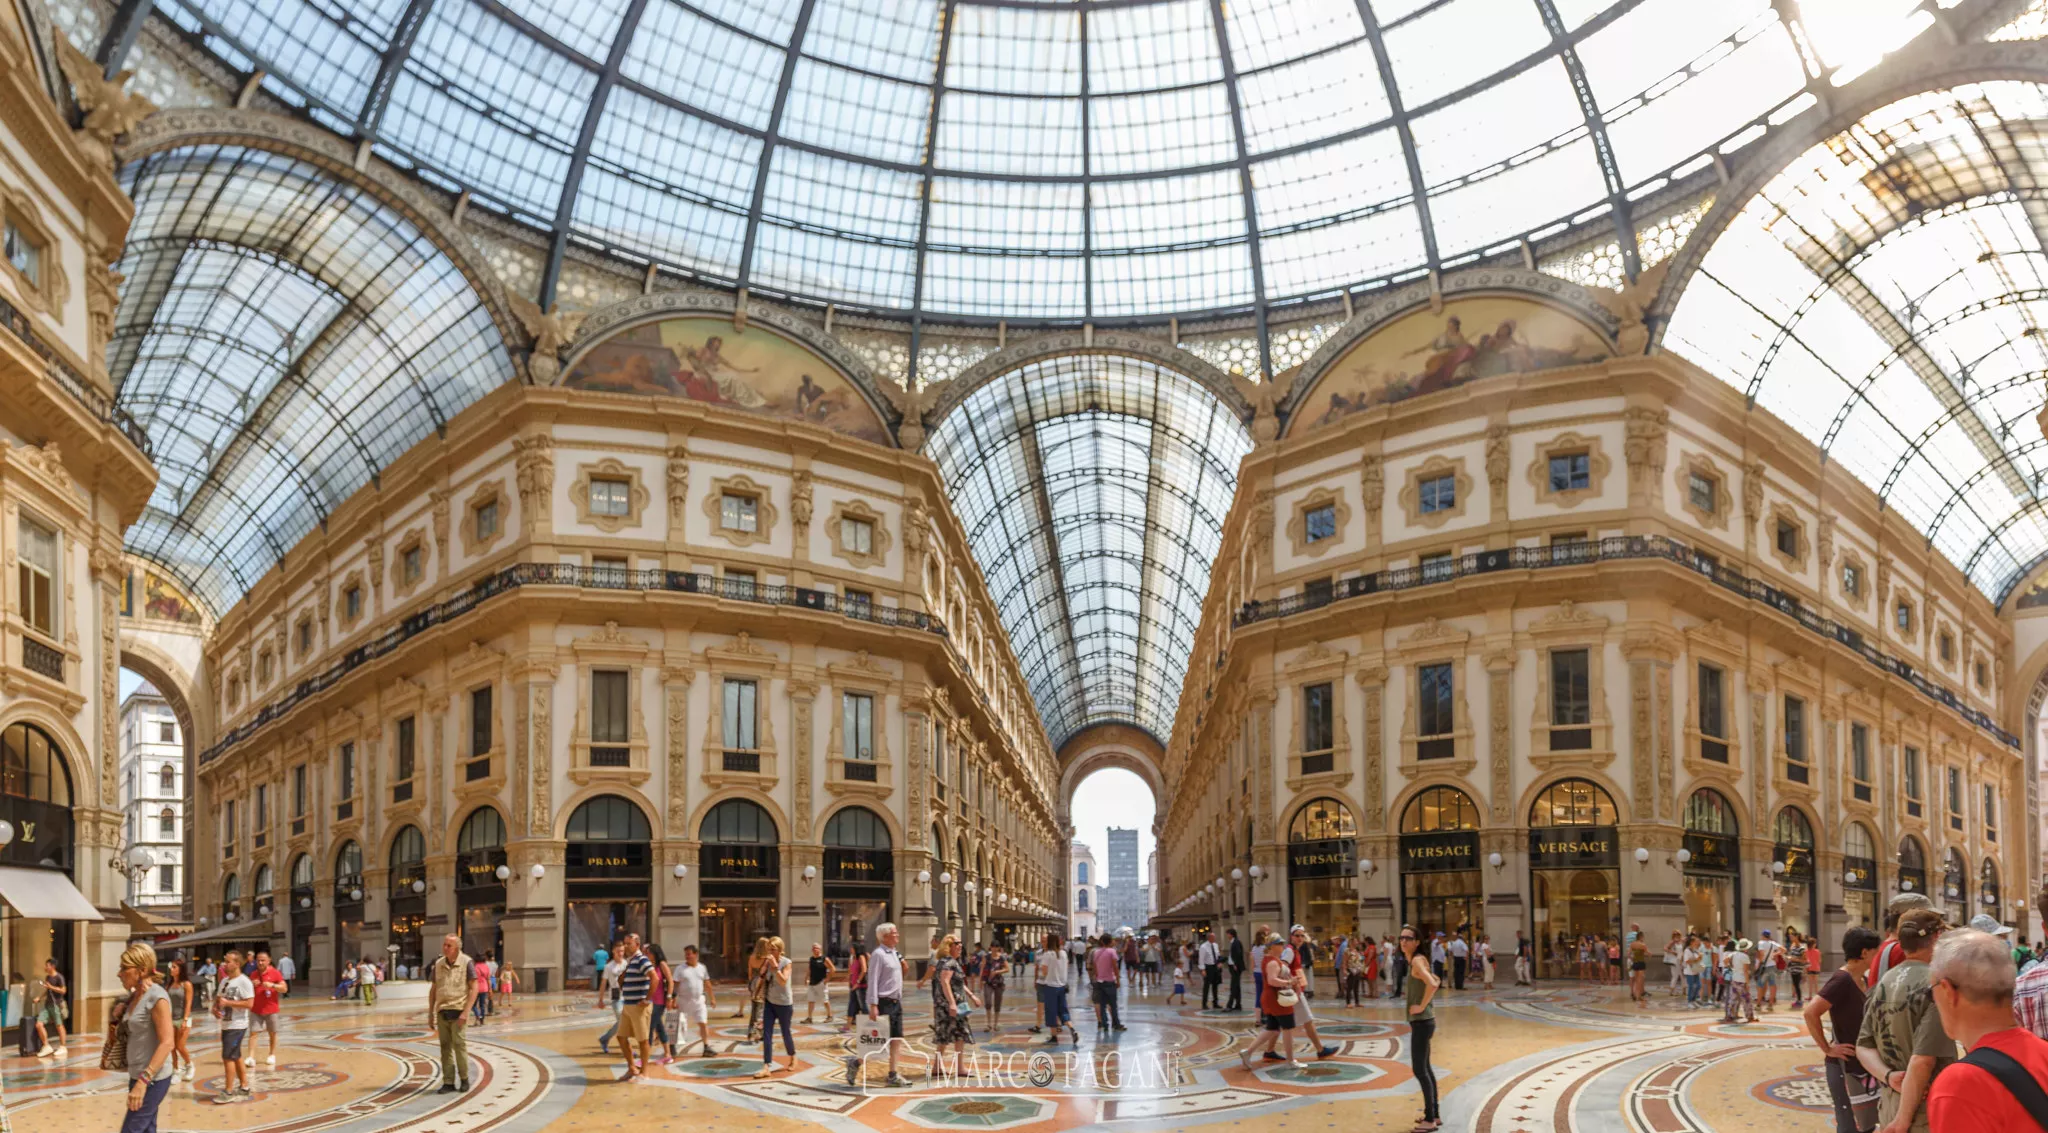 Galleria Vittorio Emanuele II in Italy, europe | Handbags,Shoes,Clothes,Gifts,Other Crafts,Art - Country Helper